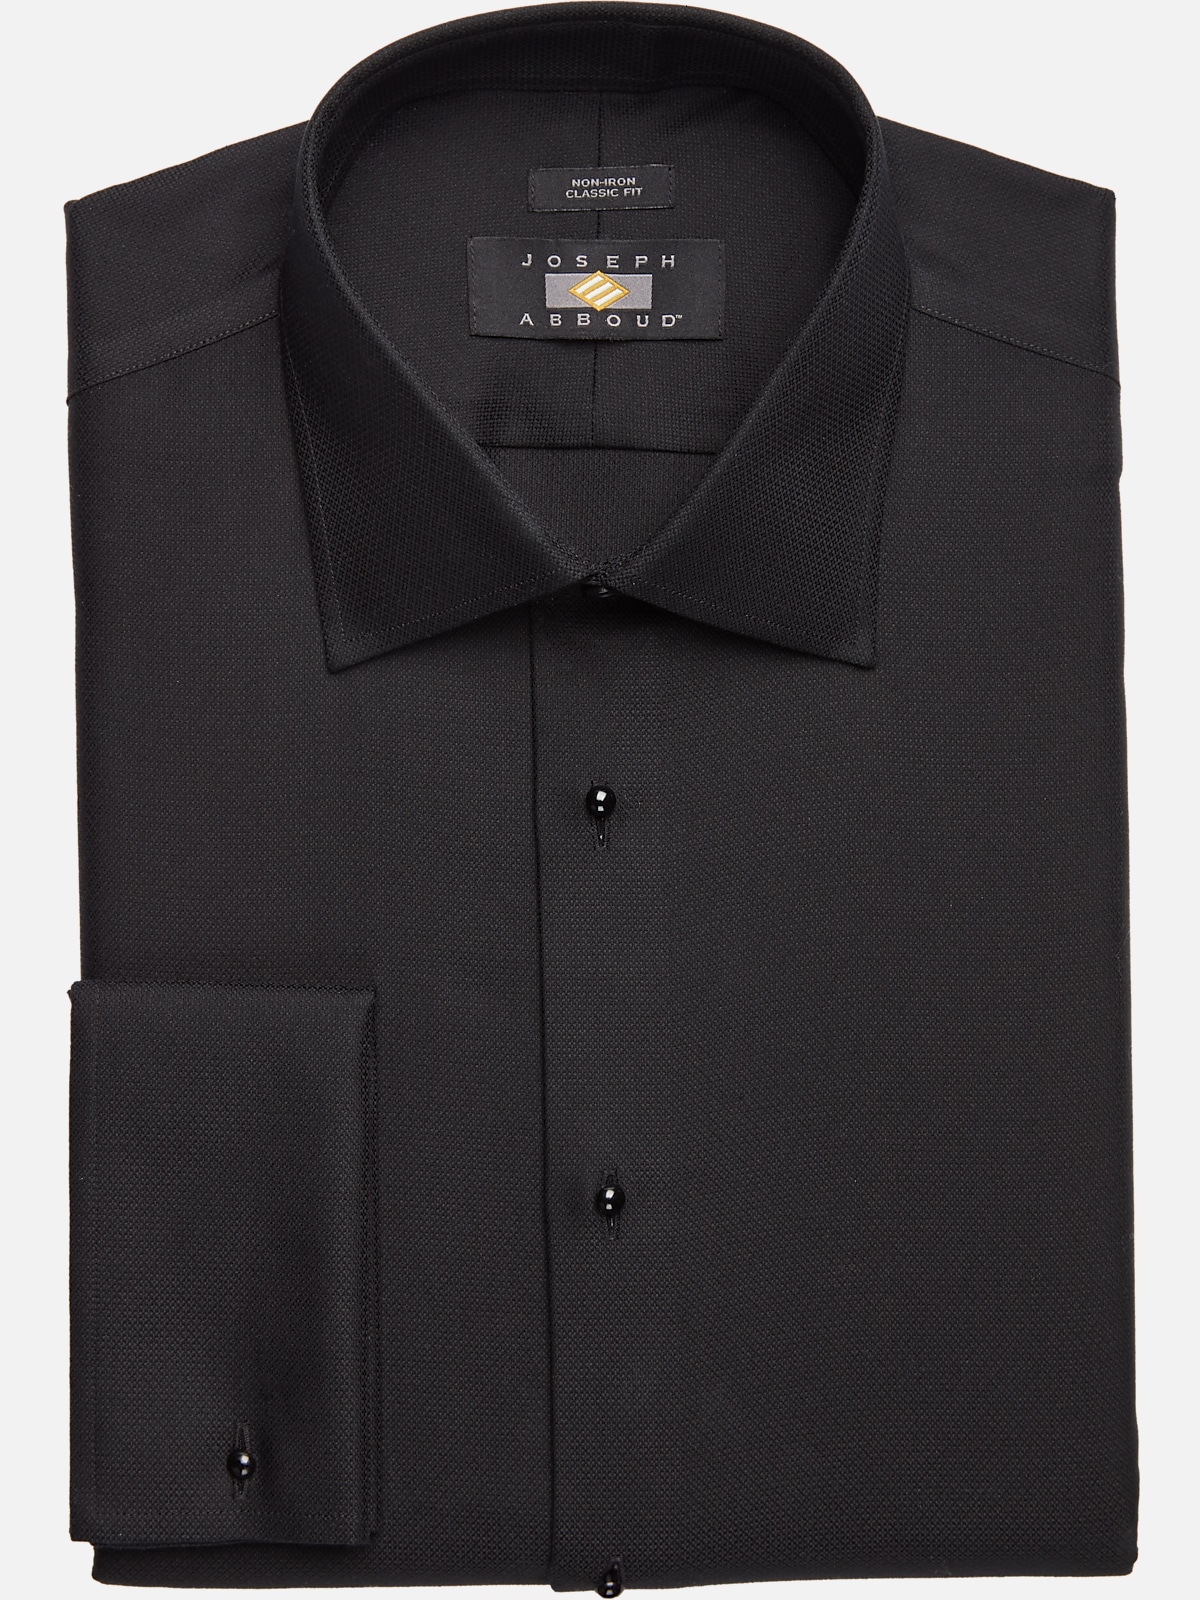 Joseph Abboud Classic Fit French Cuff Tuxedo Formal Shirt | All ...